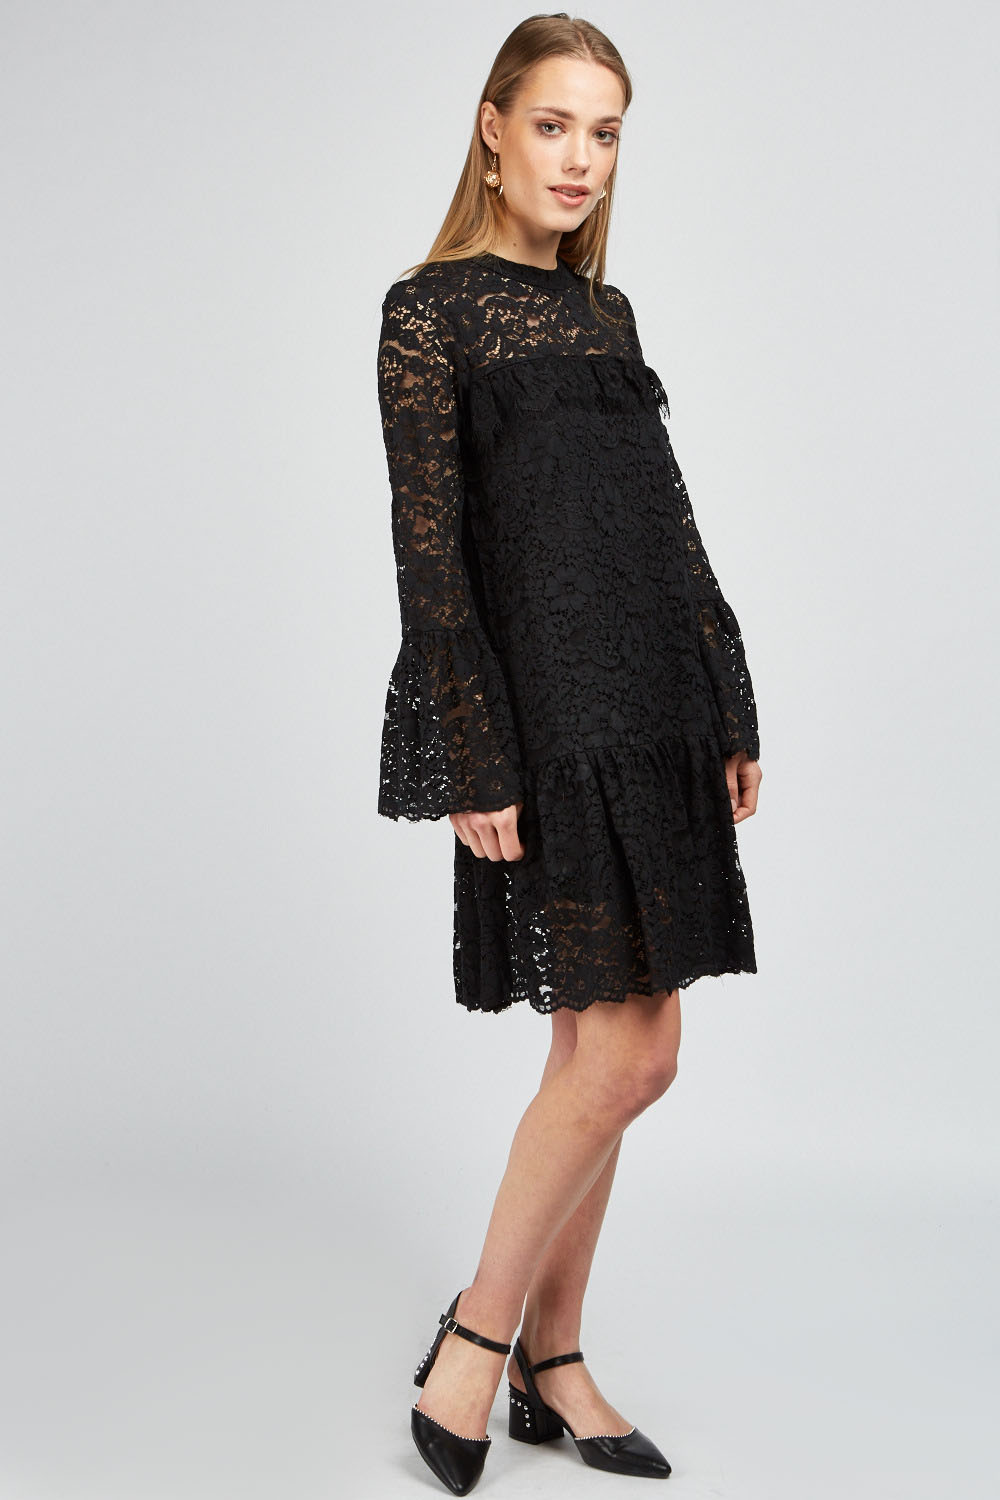 Ruffle Lace Overlay Shift Dress - 3 Colours - Just £5